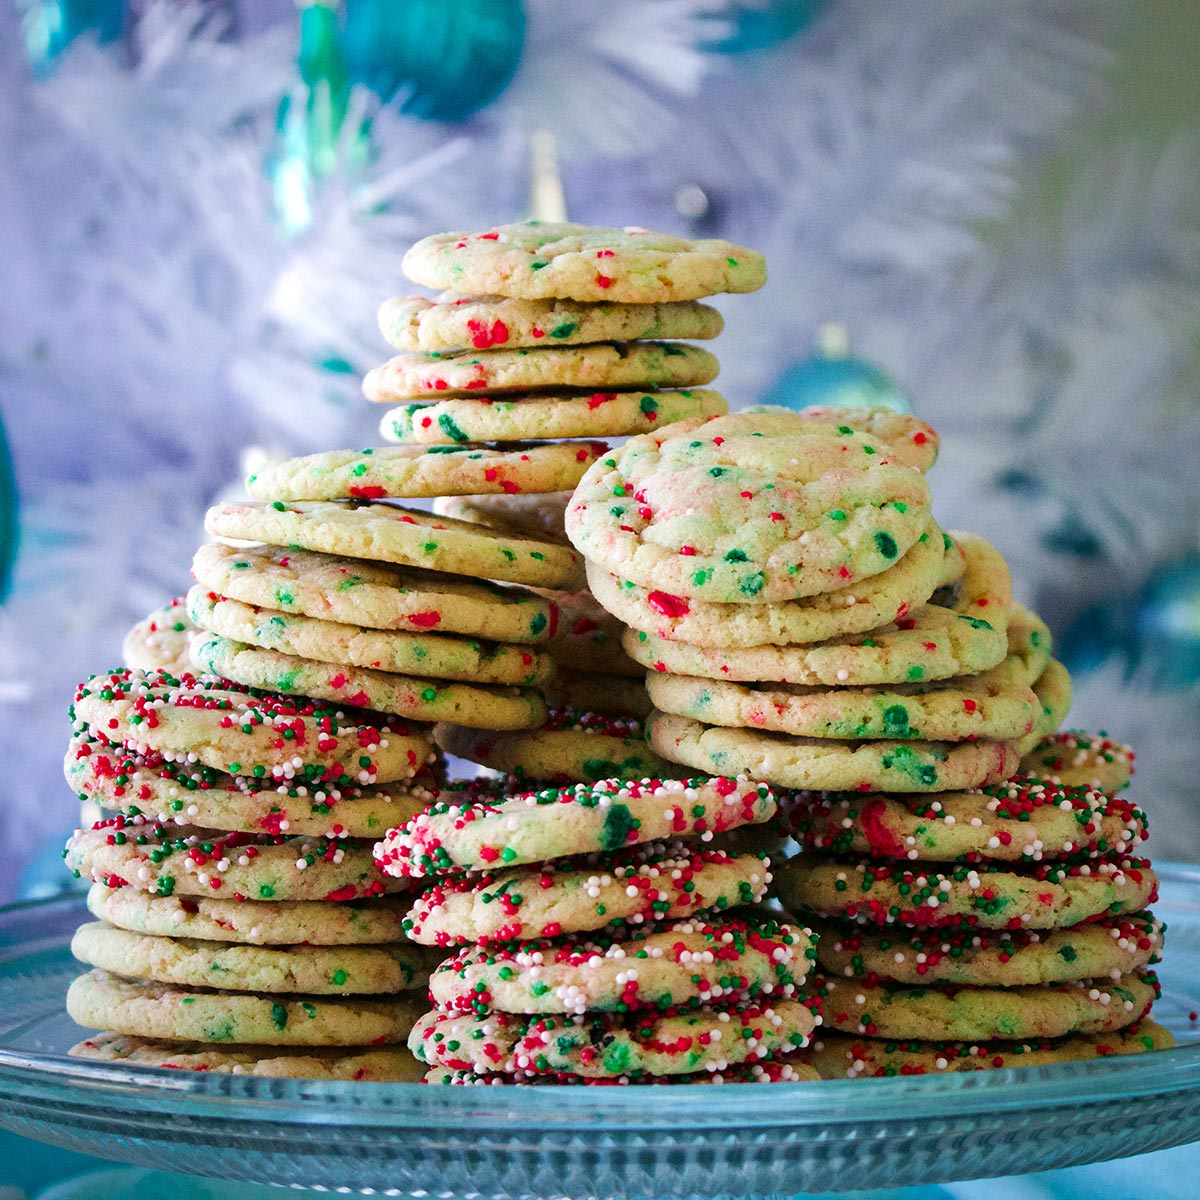 Stacks of Christmas funfetti cookies towering high on a glass platter.